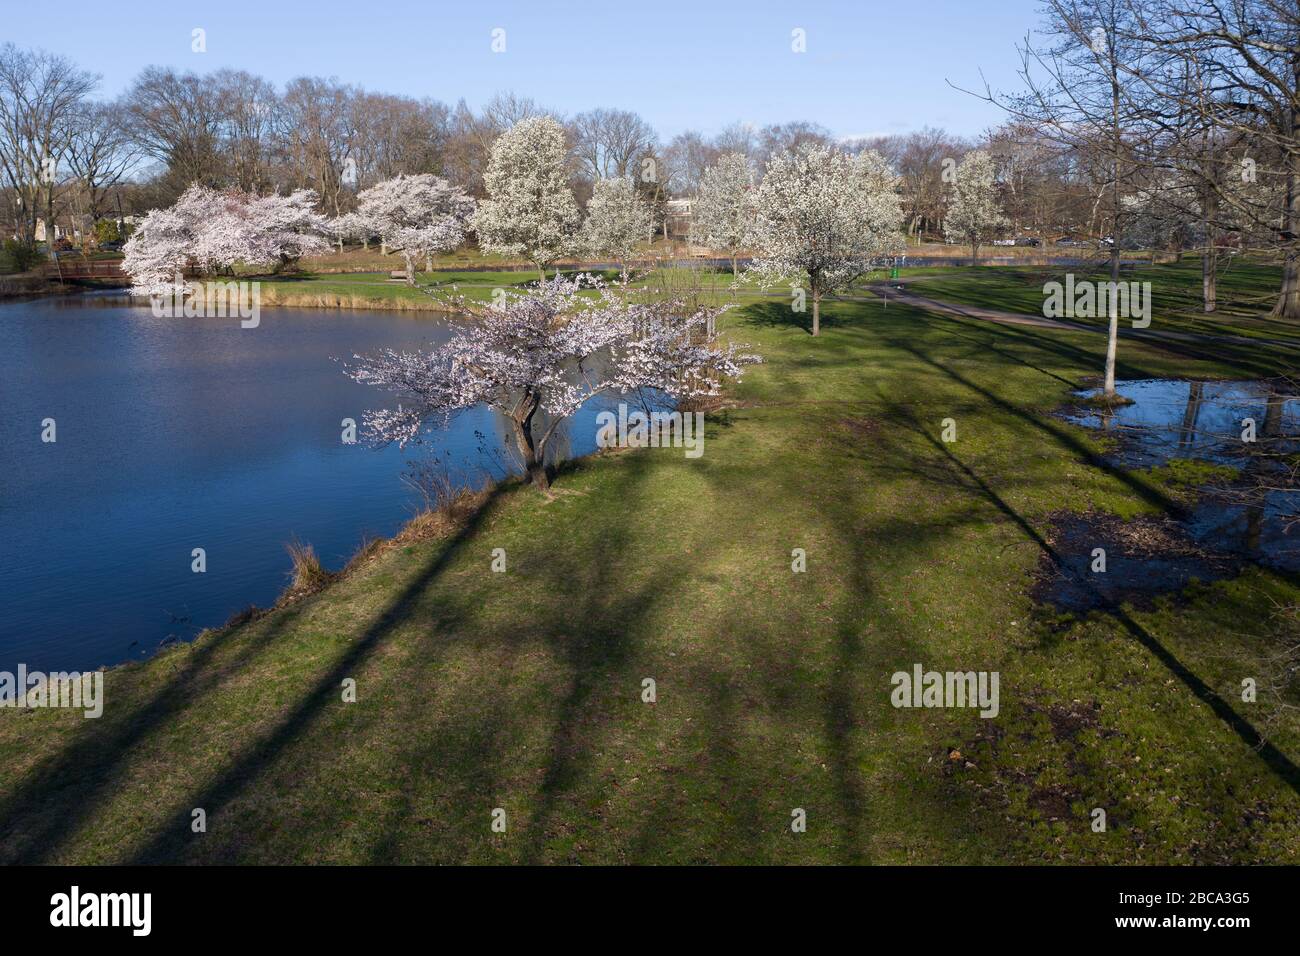 Aerial view of long shadows from tall trees on green grass along a lake with pink cherry trees in the background. Stock Photo